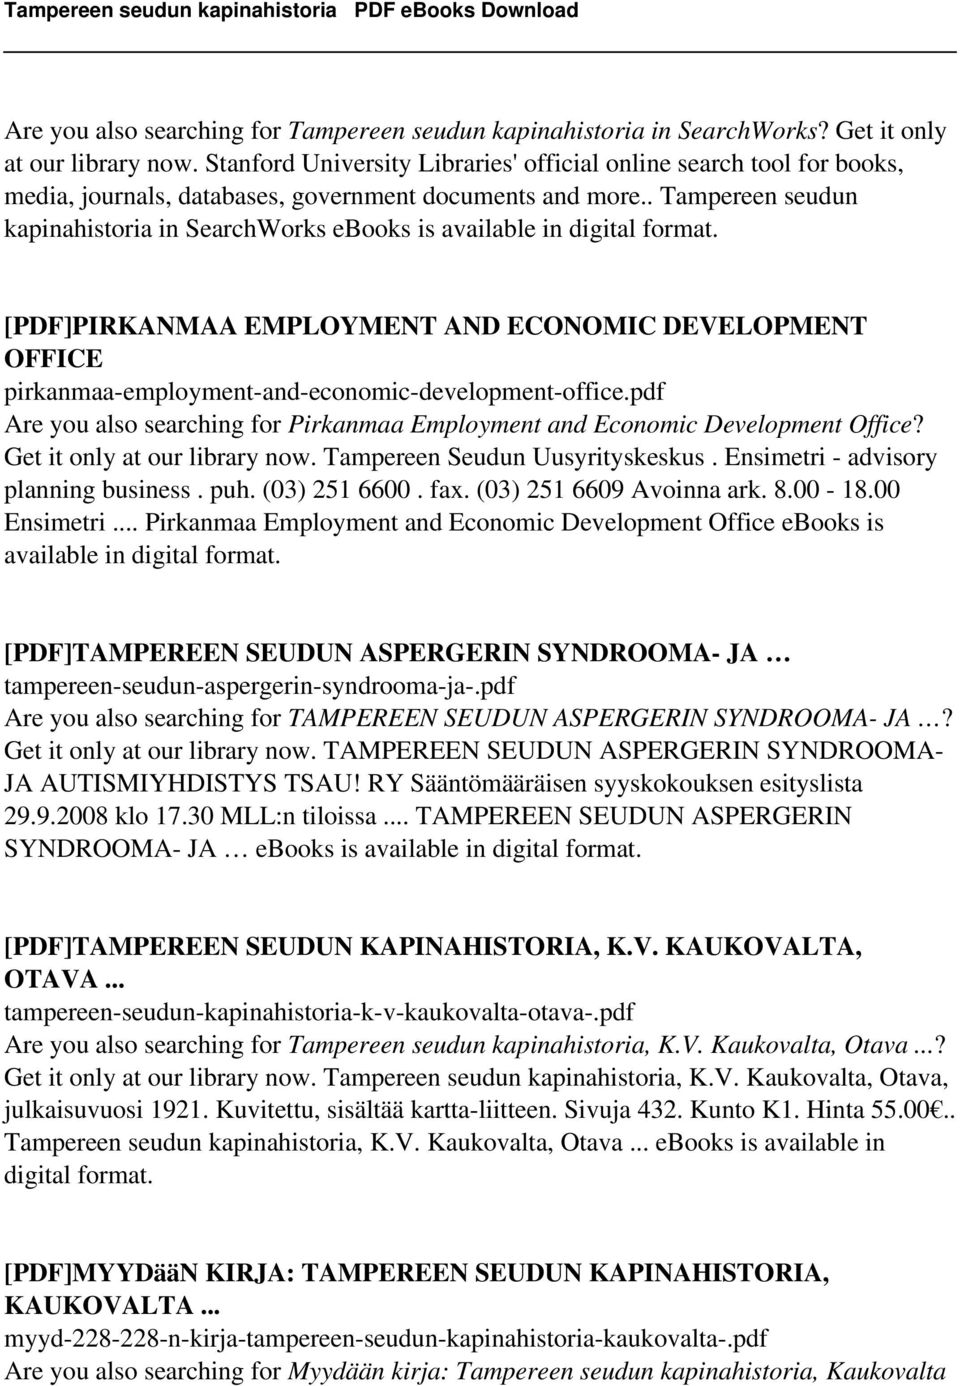 . Tampereen seudun kapinahistoria in SearchWorks ebooks is available in digital format. [PDF]PIRKANMAA EMPLOYMENT AND ECONOMIC DEVELOPMENT OFFICE pirkanmaa-employment-and-economic-development-office.